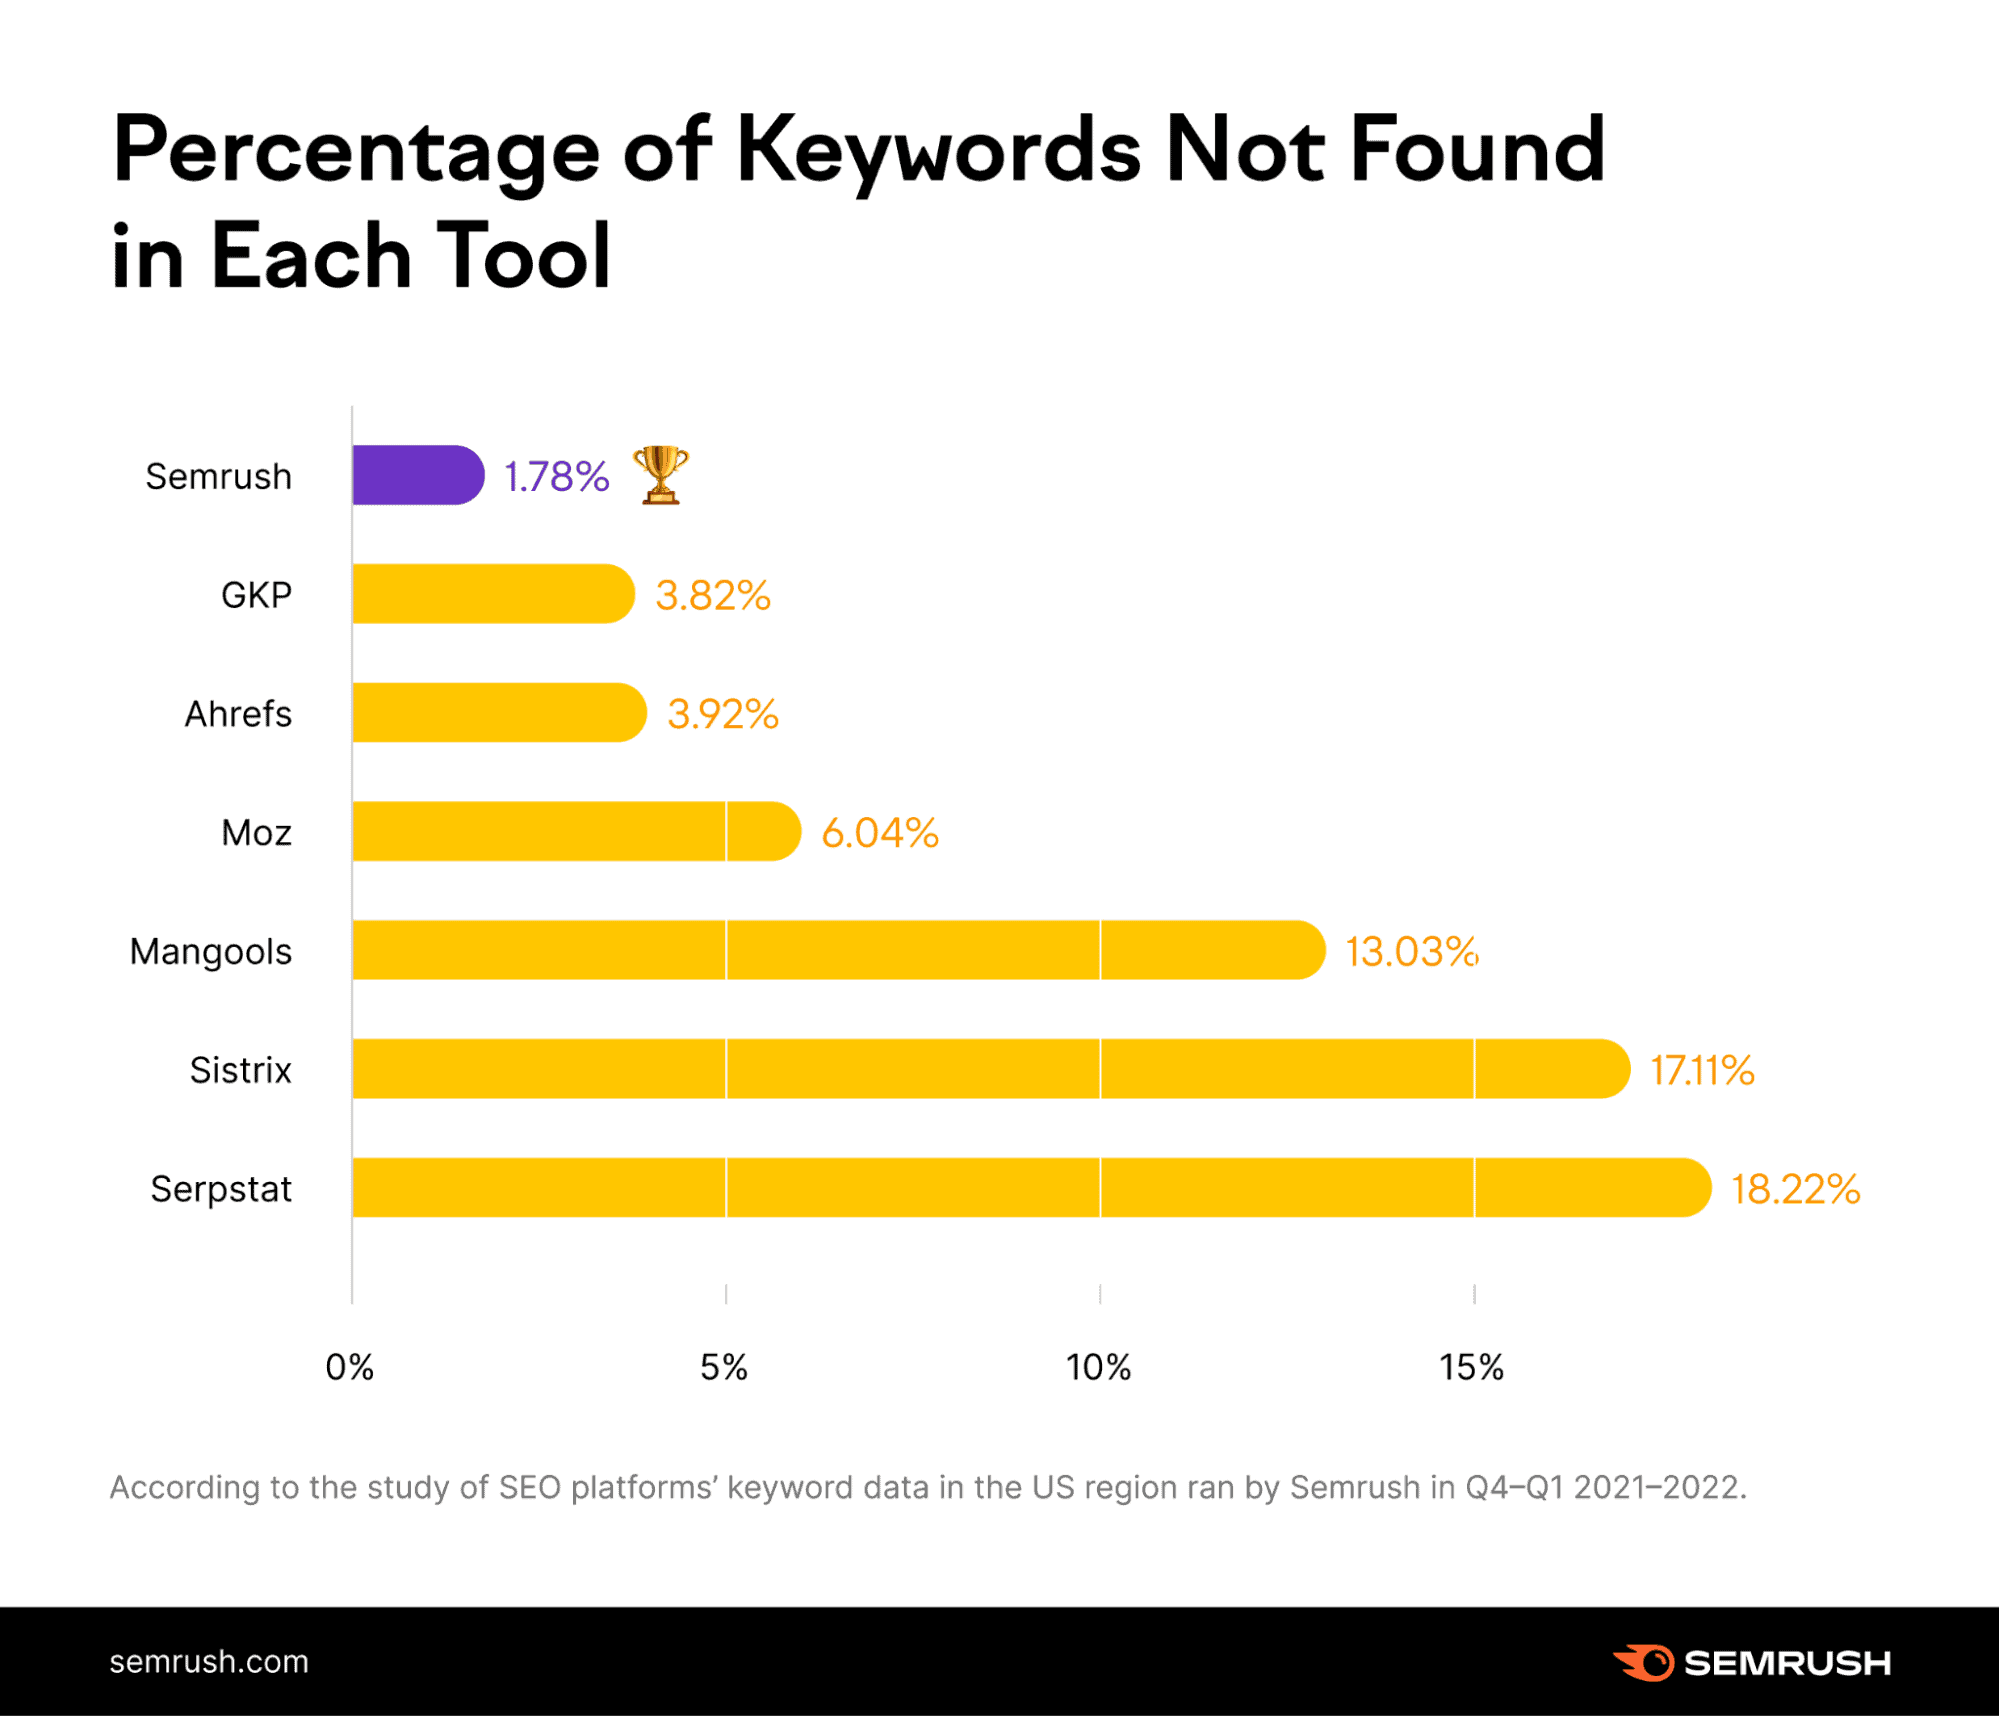 Percentage of keywords that were not found